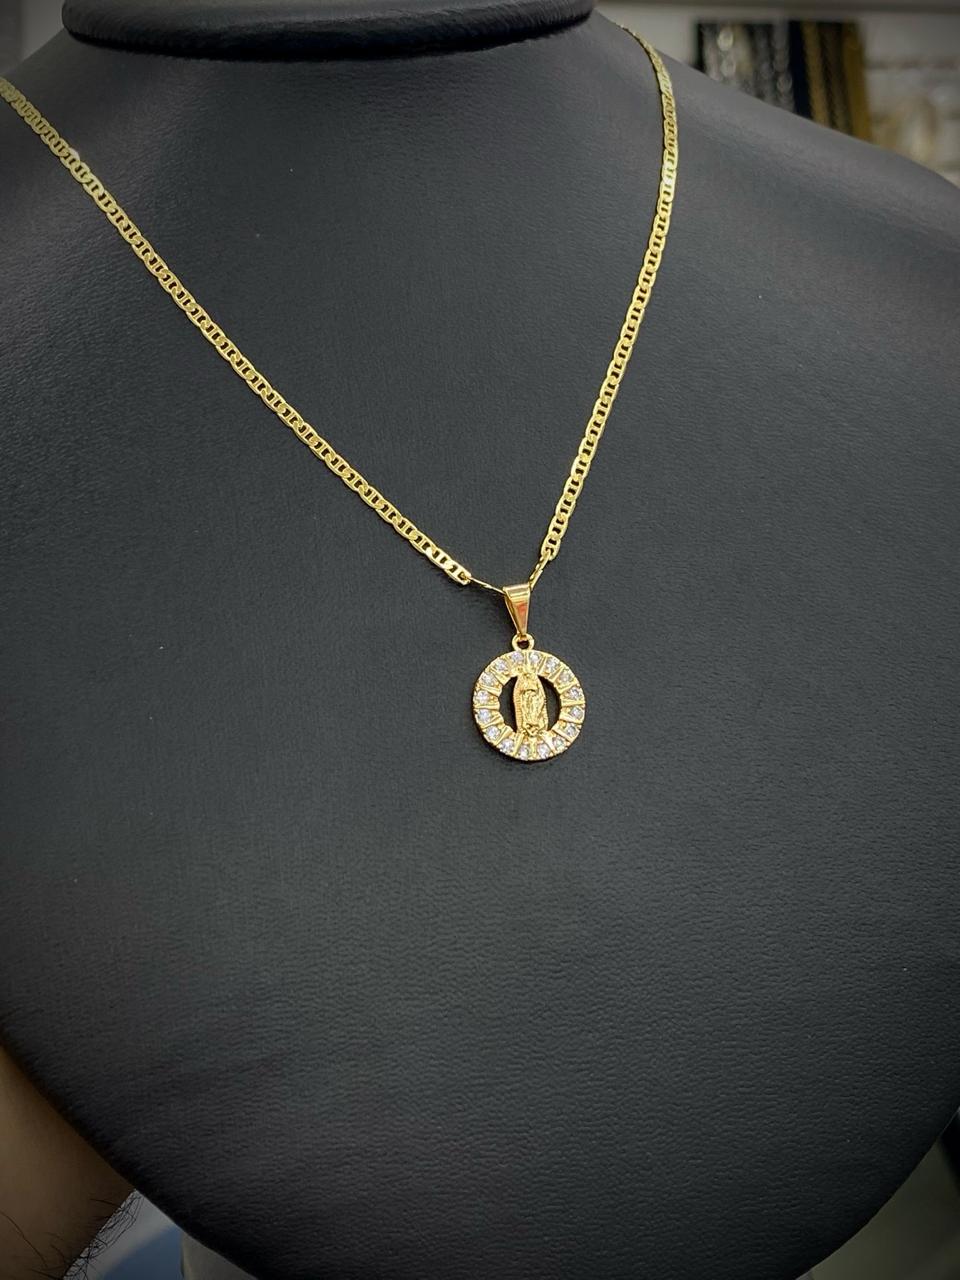 Round CZ Virgen de Guadalupe Necklace Mariner Chain Gold Filled Gifts Jewel